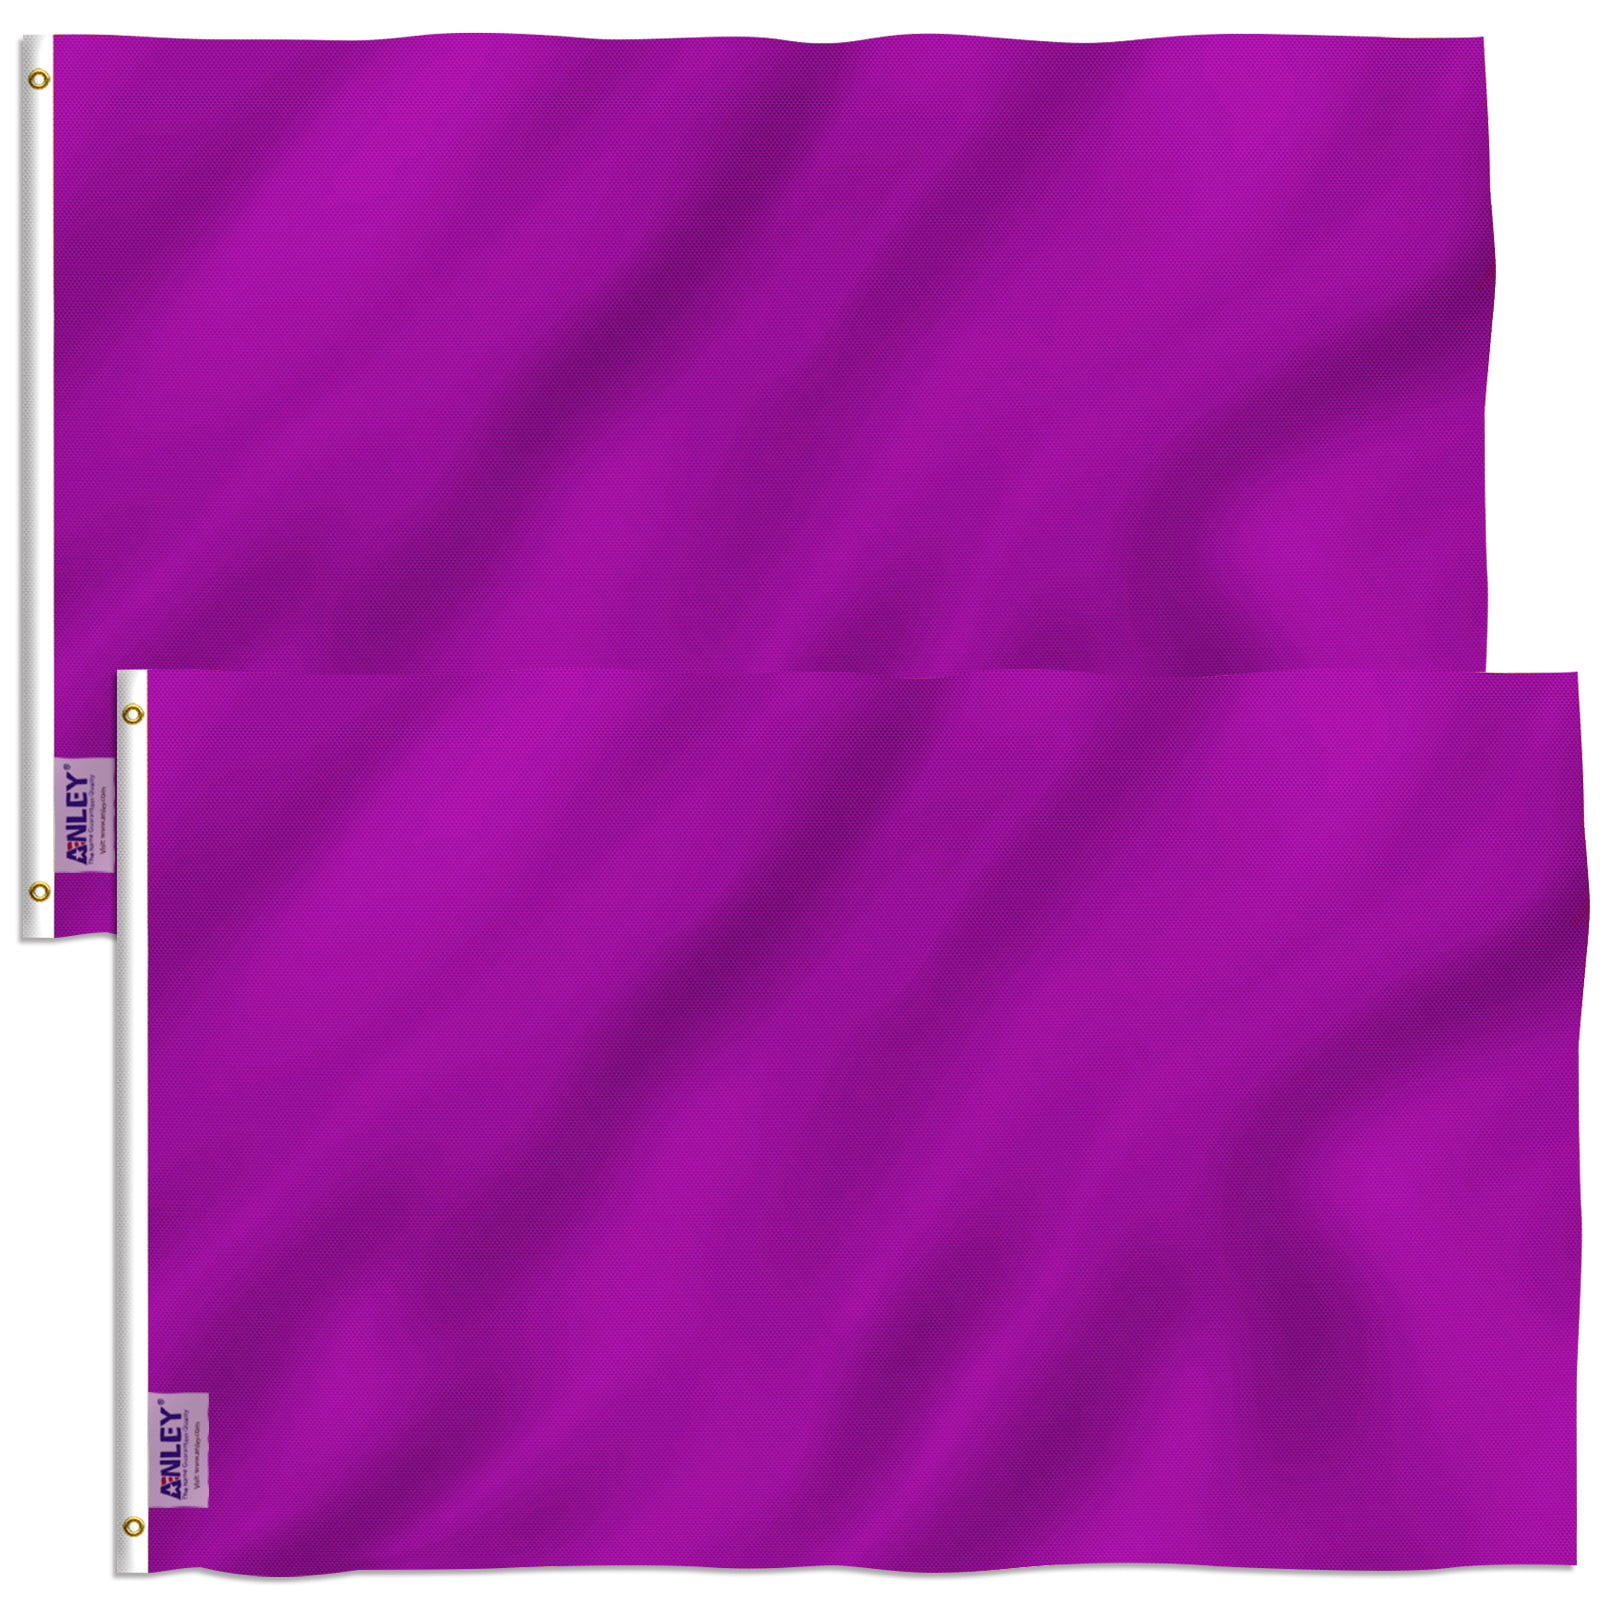 GOLD  Solid Color Flags 3x5 Polyester 